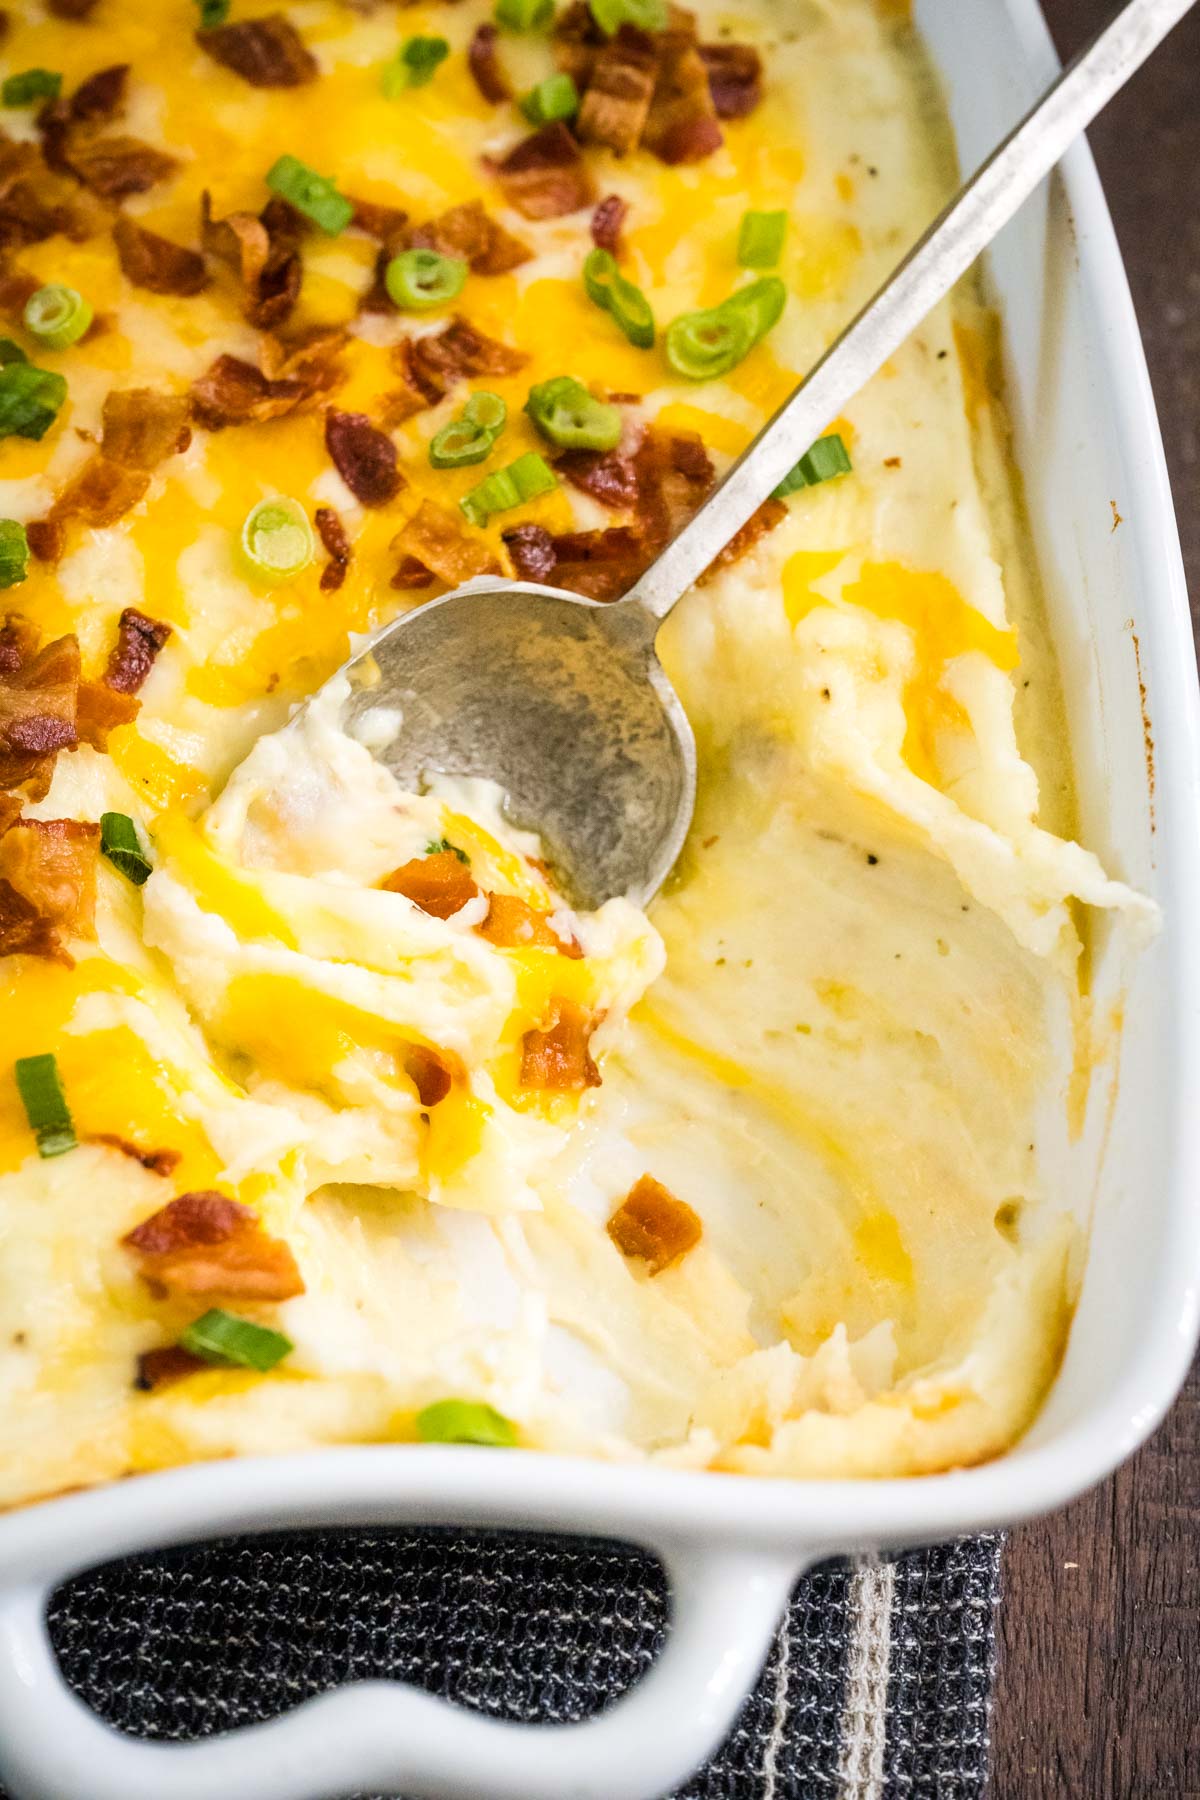 A casserole filled with mashed potatoes loaded with cheese and bacon.